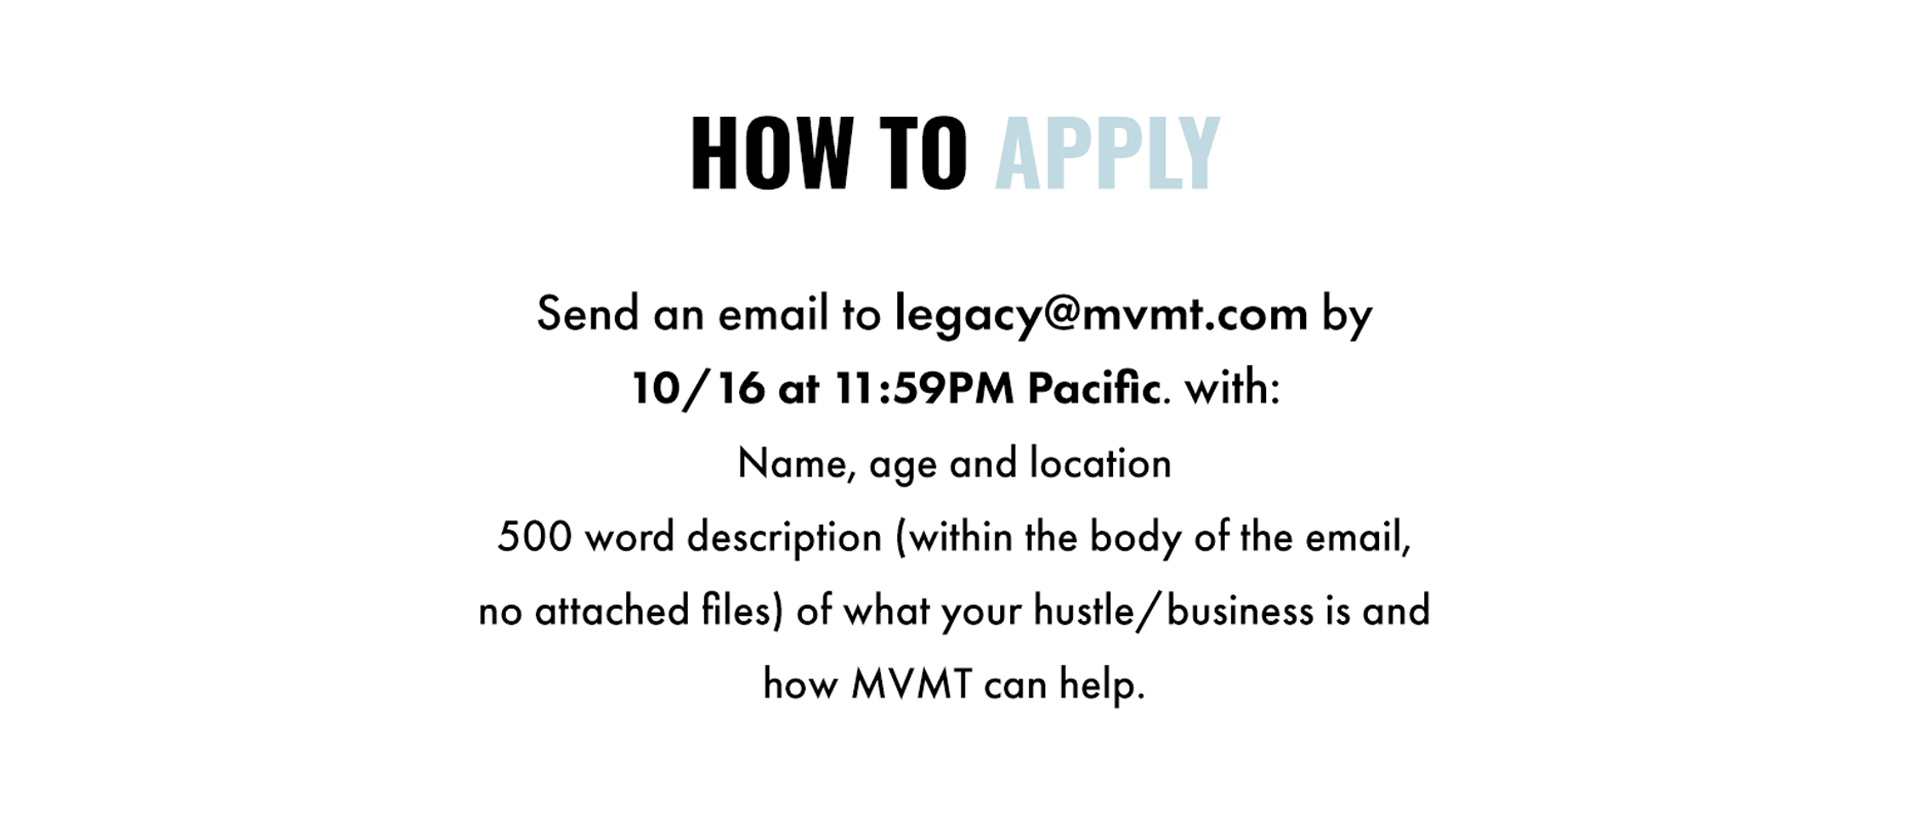 How to apply: Send an email to legacy@mvmt.com by 10/16 at 11:59PM Pacific. with: Name, age and location. 500 word description (within the body of the email, no attached files) of what your hustle/business is and how MVMT can help.